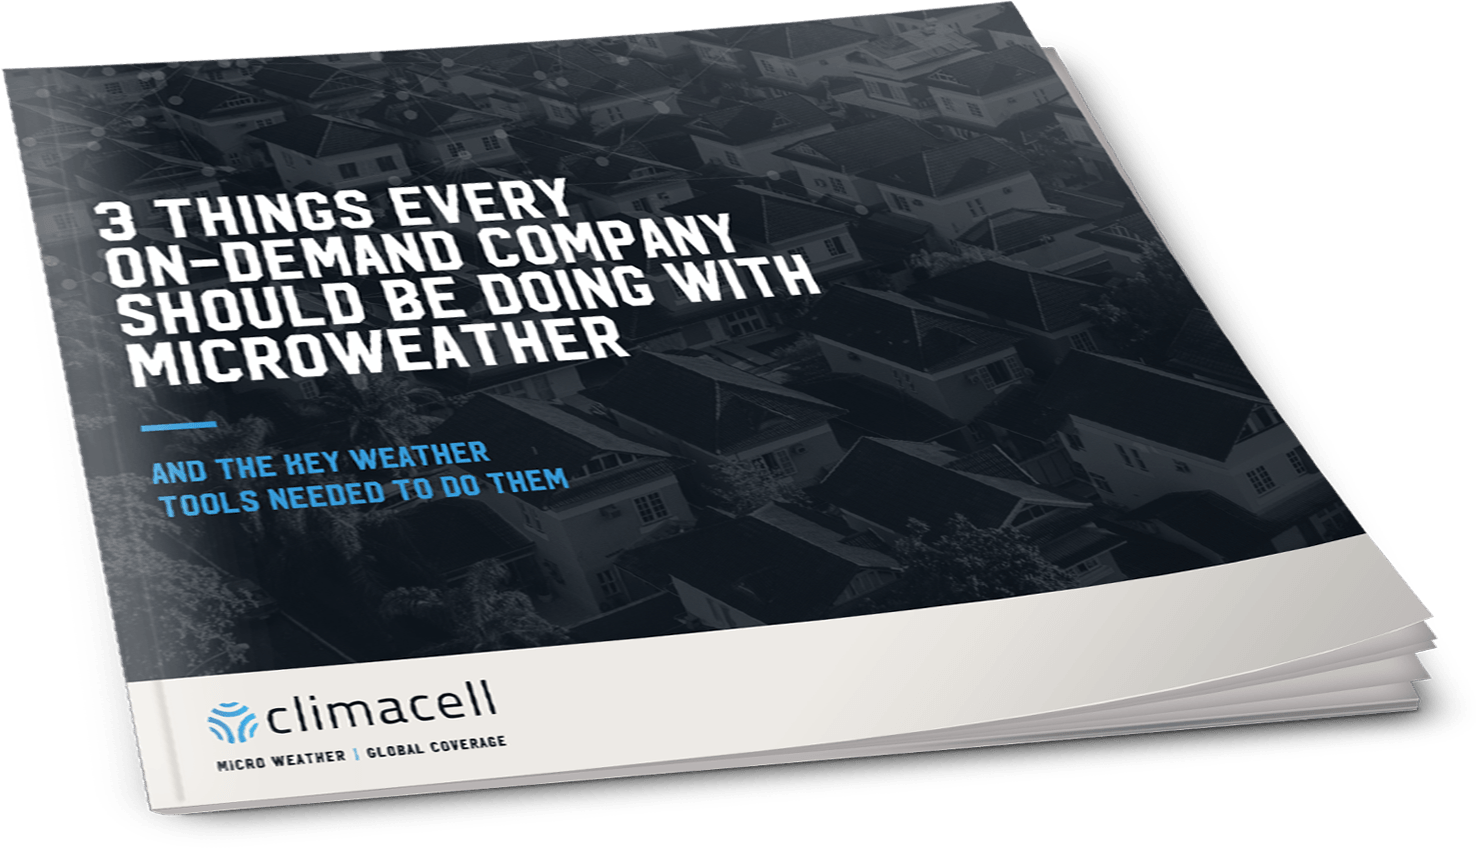 3 Things Every On-Demand Company Should be Doing with Microweather | ClimaCell | Micro Weather. Global Coverage.